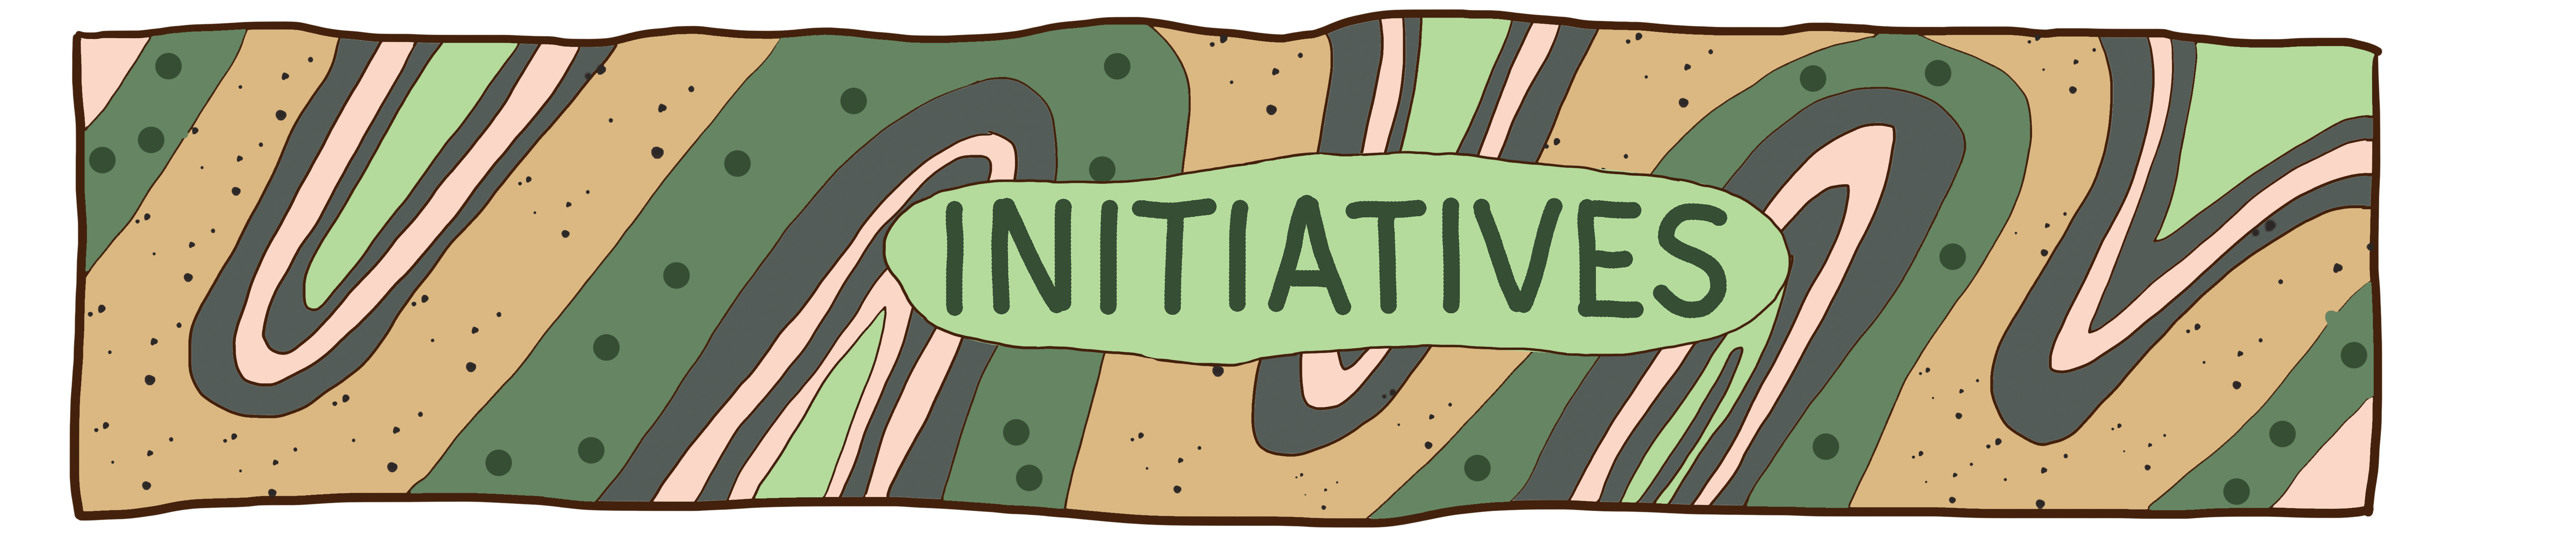 initiatives page header 